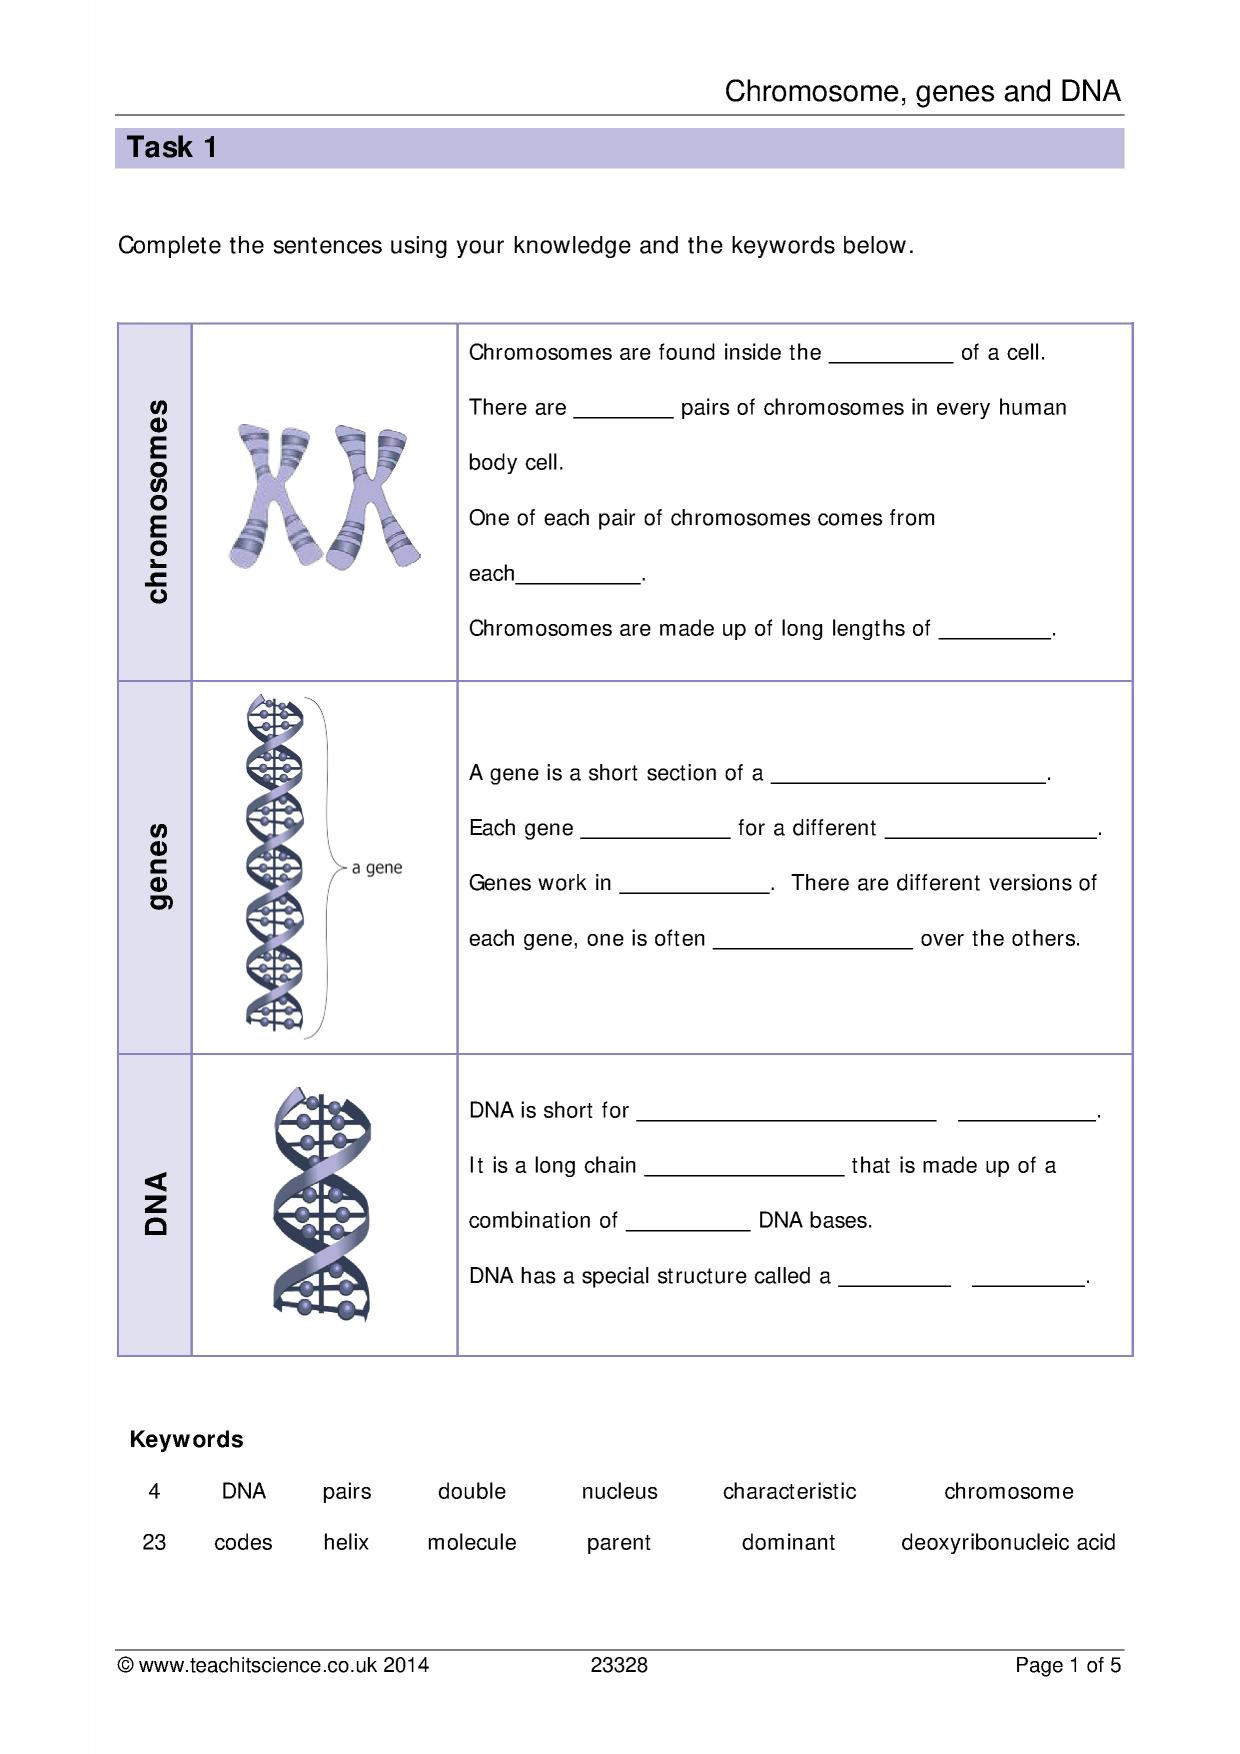 Dna Structure Worksheet Answer Chromosomes Genes and Dna Worksheet with Answers